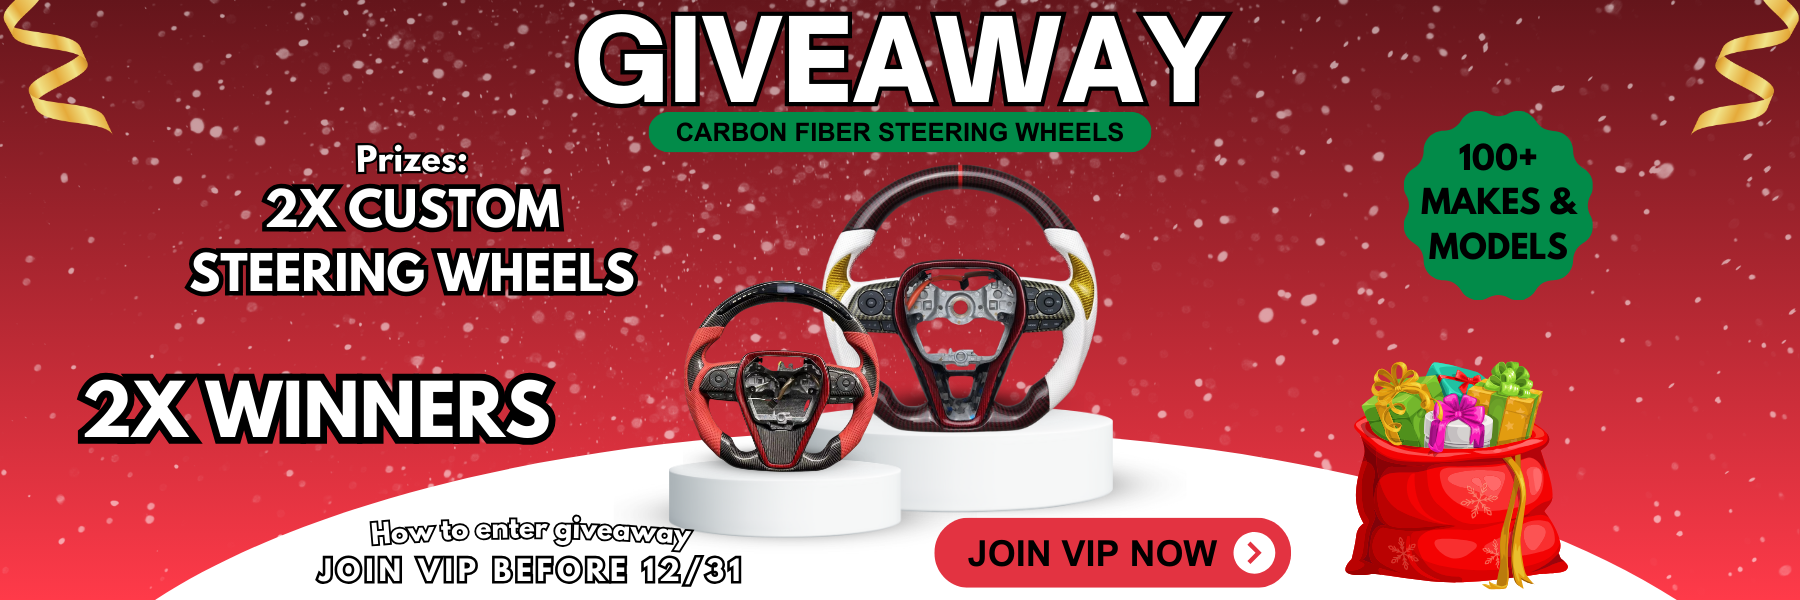 Steering wheels Giveaway December Banners (1200 x 500 px).png__PID:f614c8dd-c71a-489f-9d79-eda60ab890a1